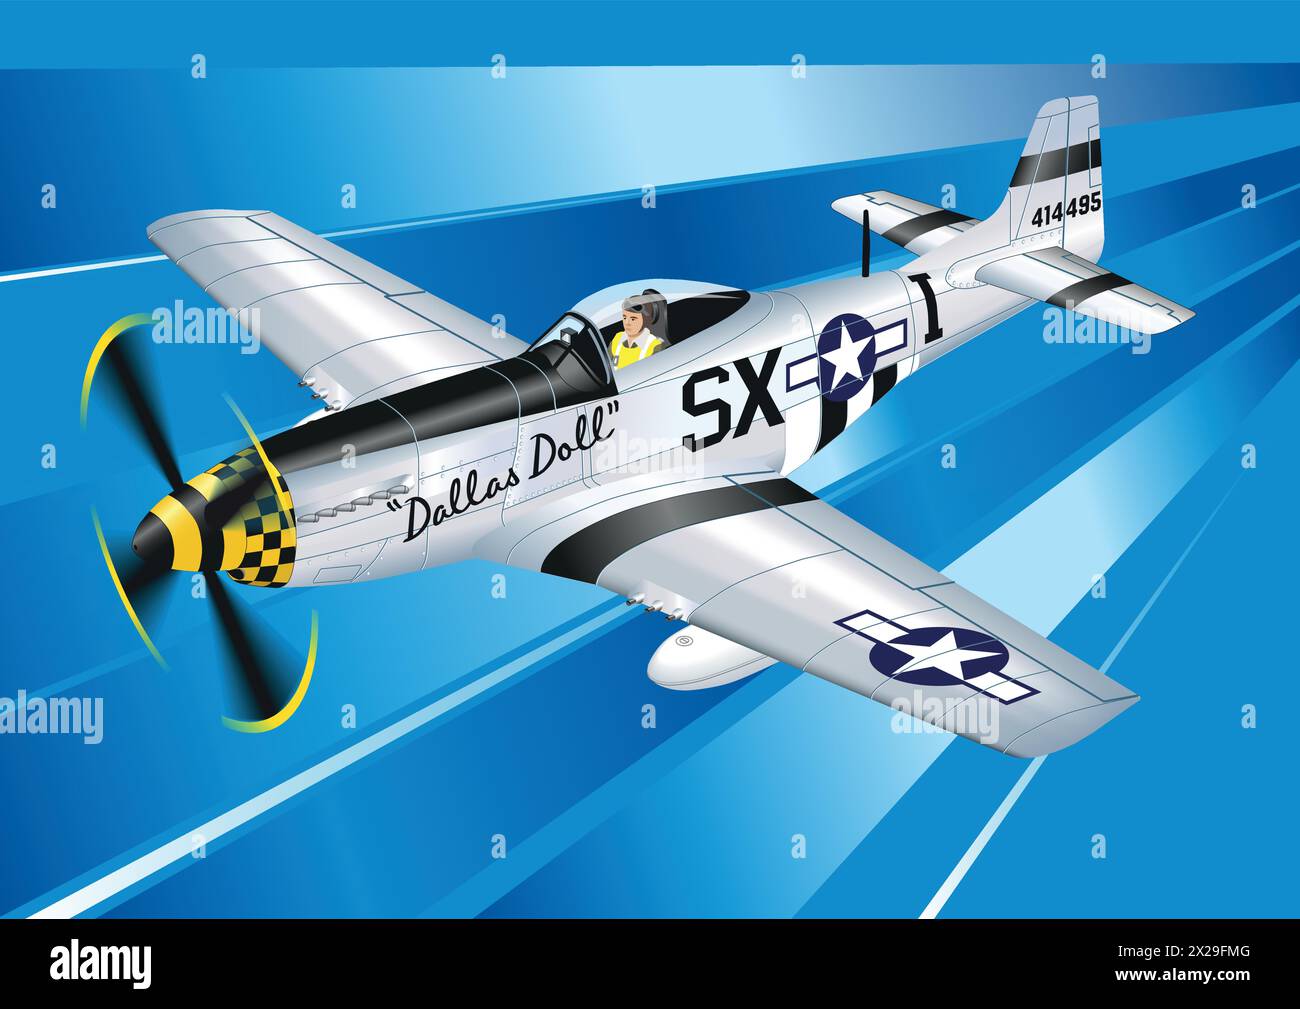 P-51 Mustang Fighter Plane airborne in isometric view. Stock Vector